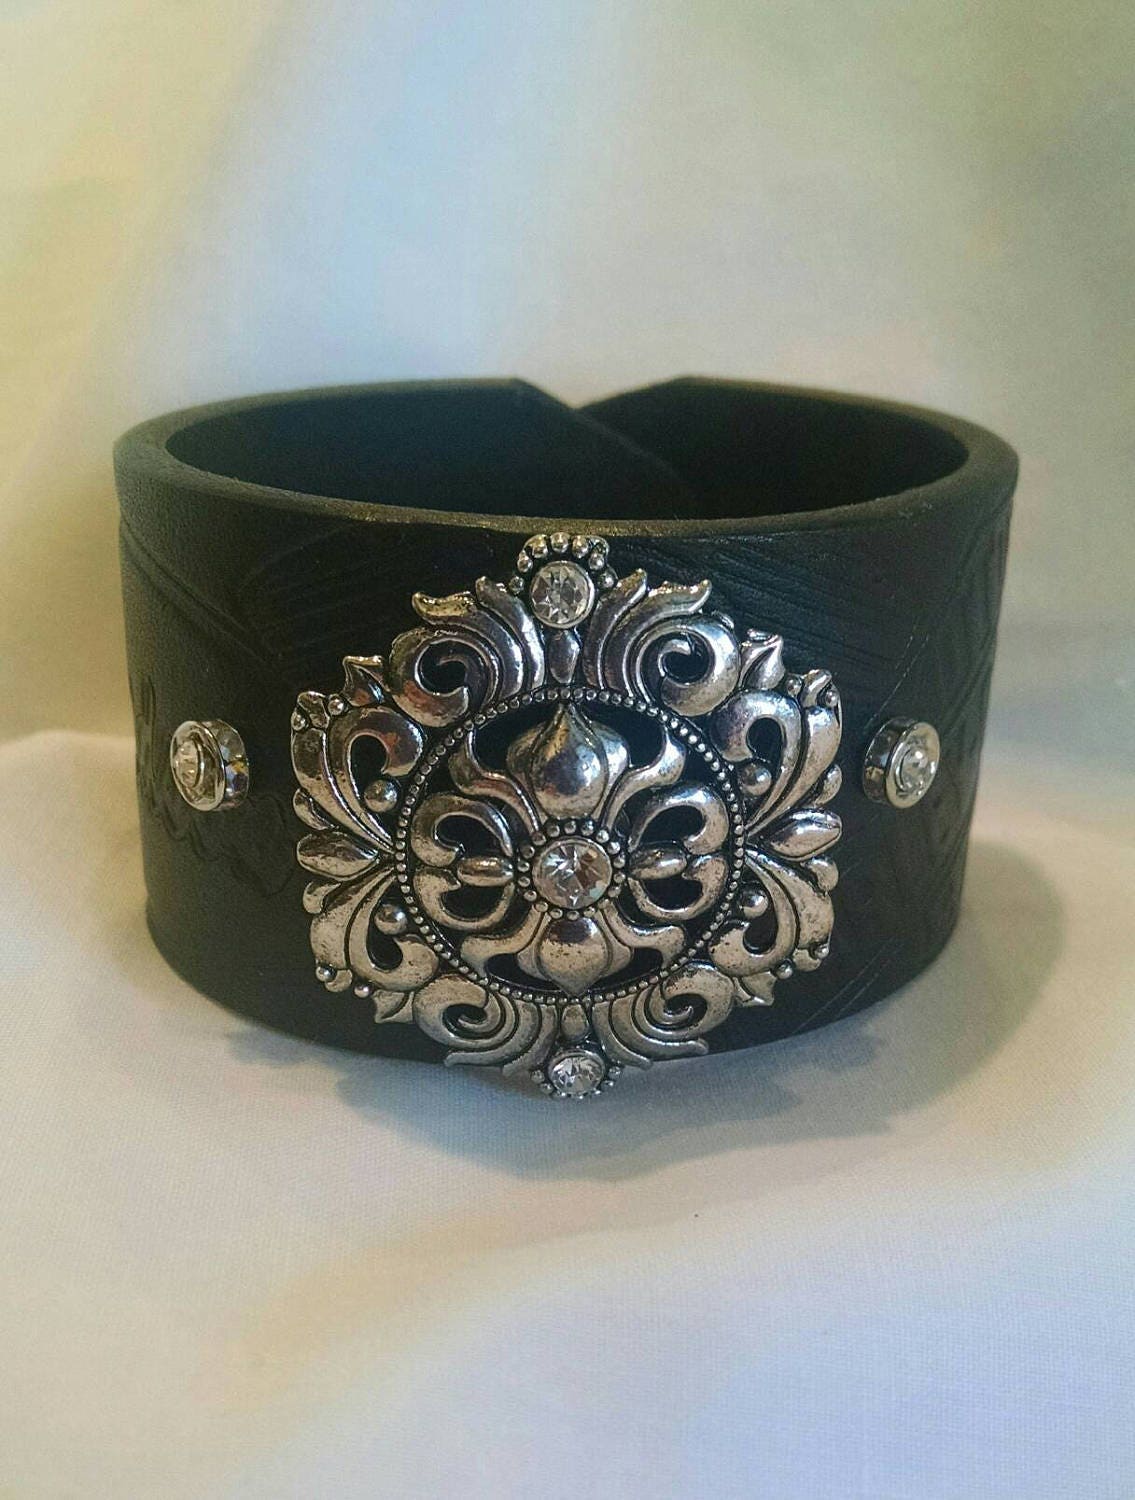 Leather cuff made from Harley Davidson belt. Black unique